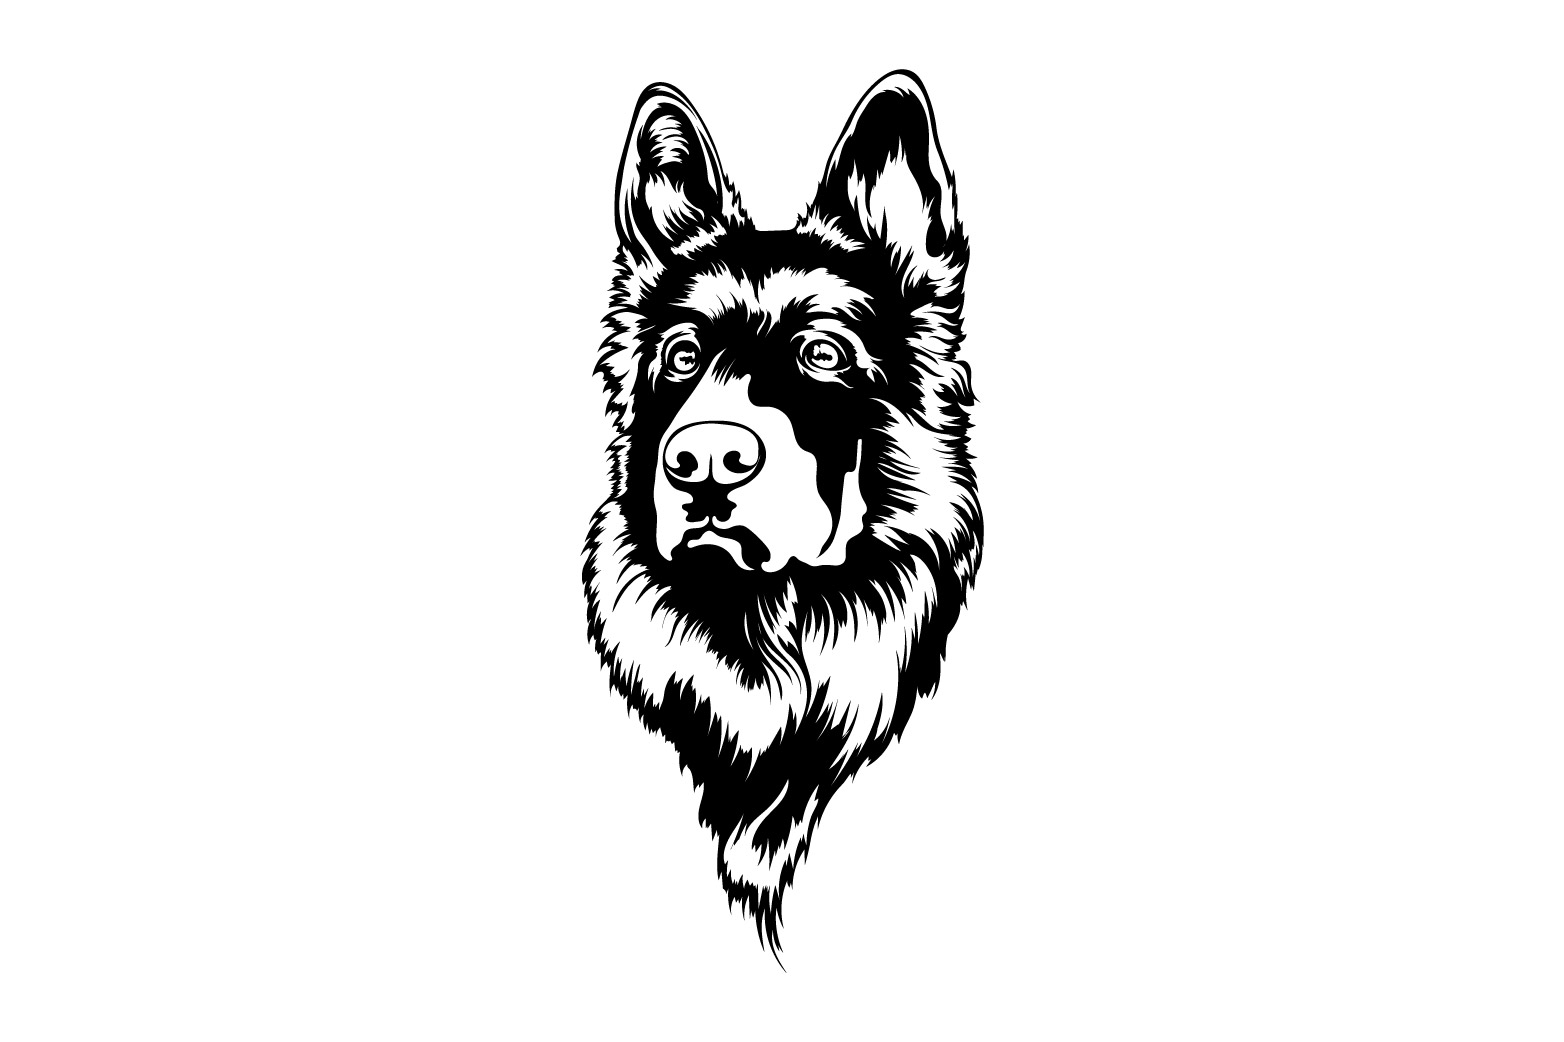 Black and white drawing of a dog's head.